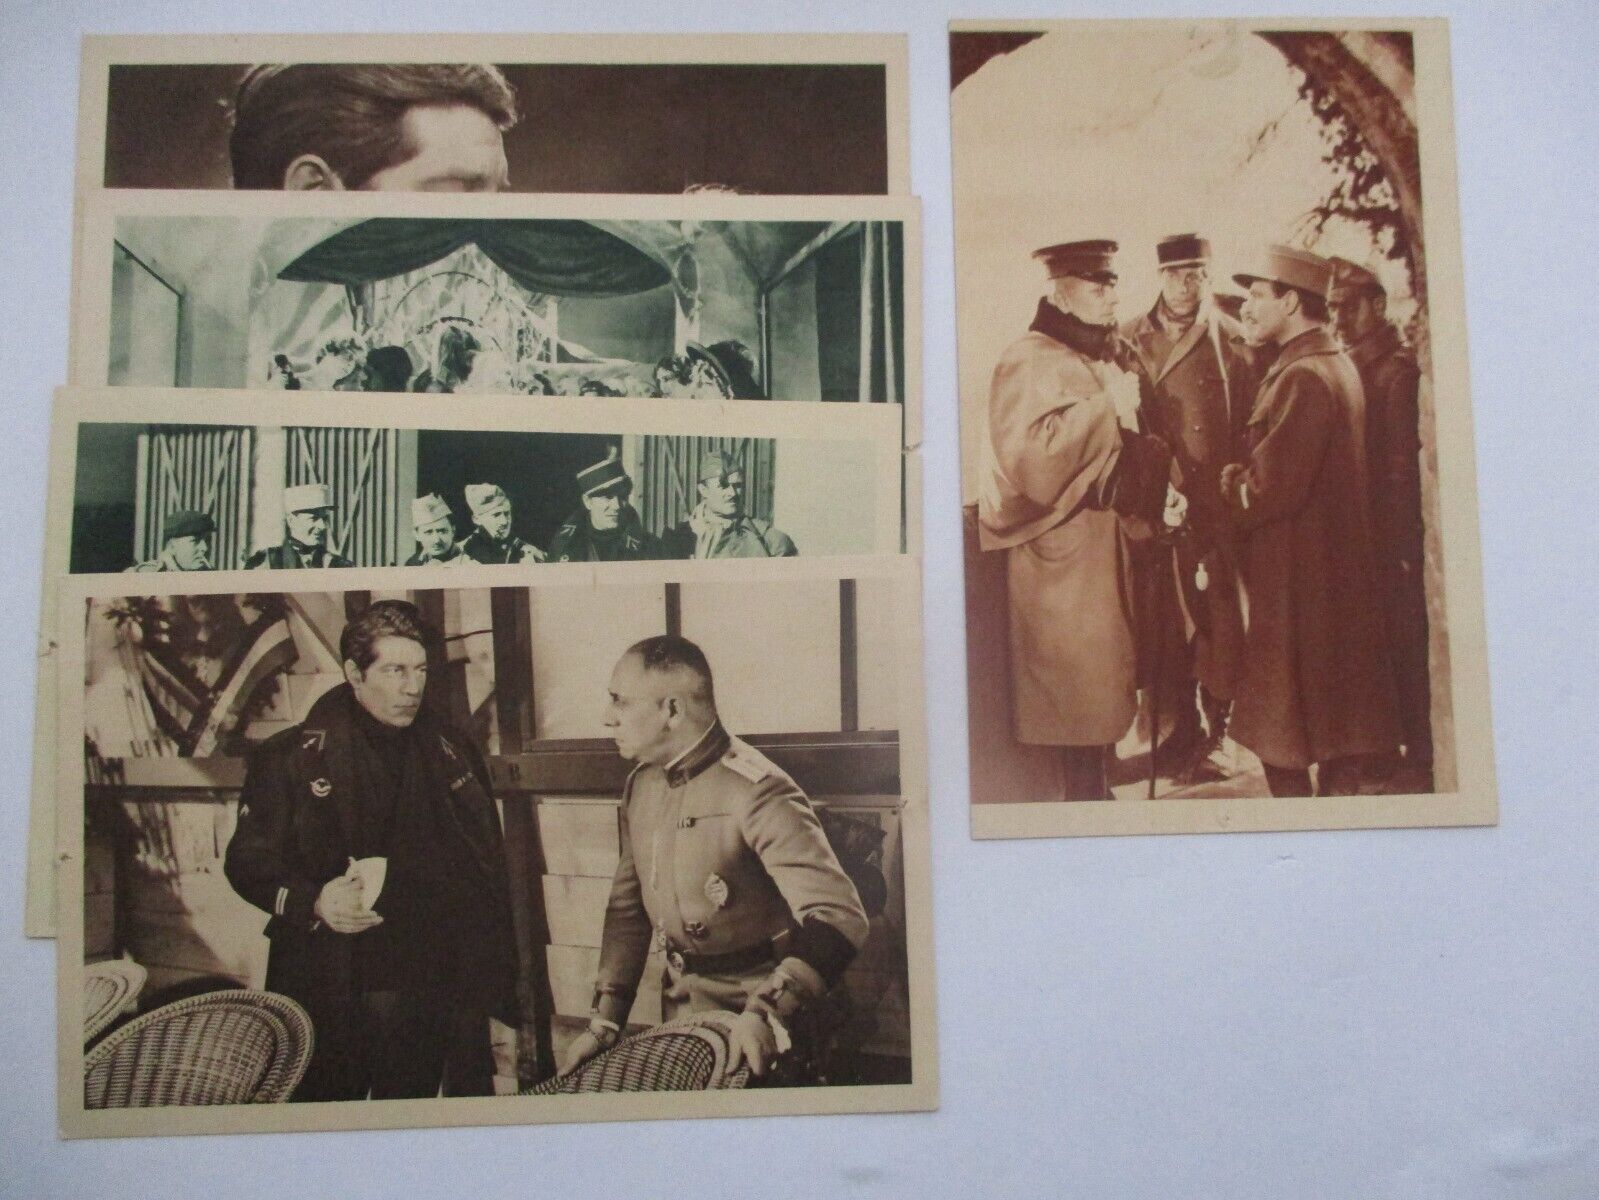 LOT OF 5 CPSM CINEMA FILM THE GREAT ILLUSION JEAN CABINET PIERRE FRESNAY